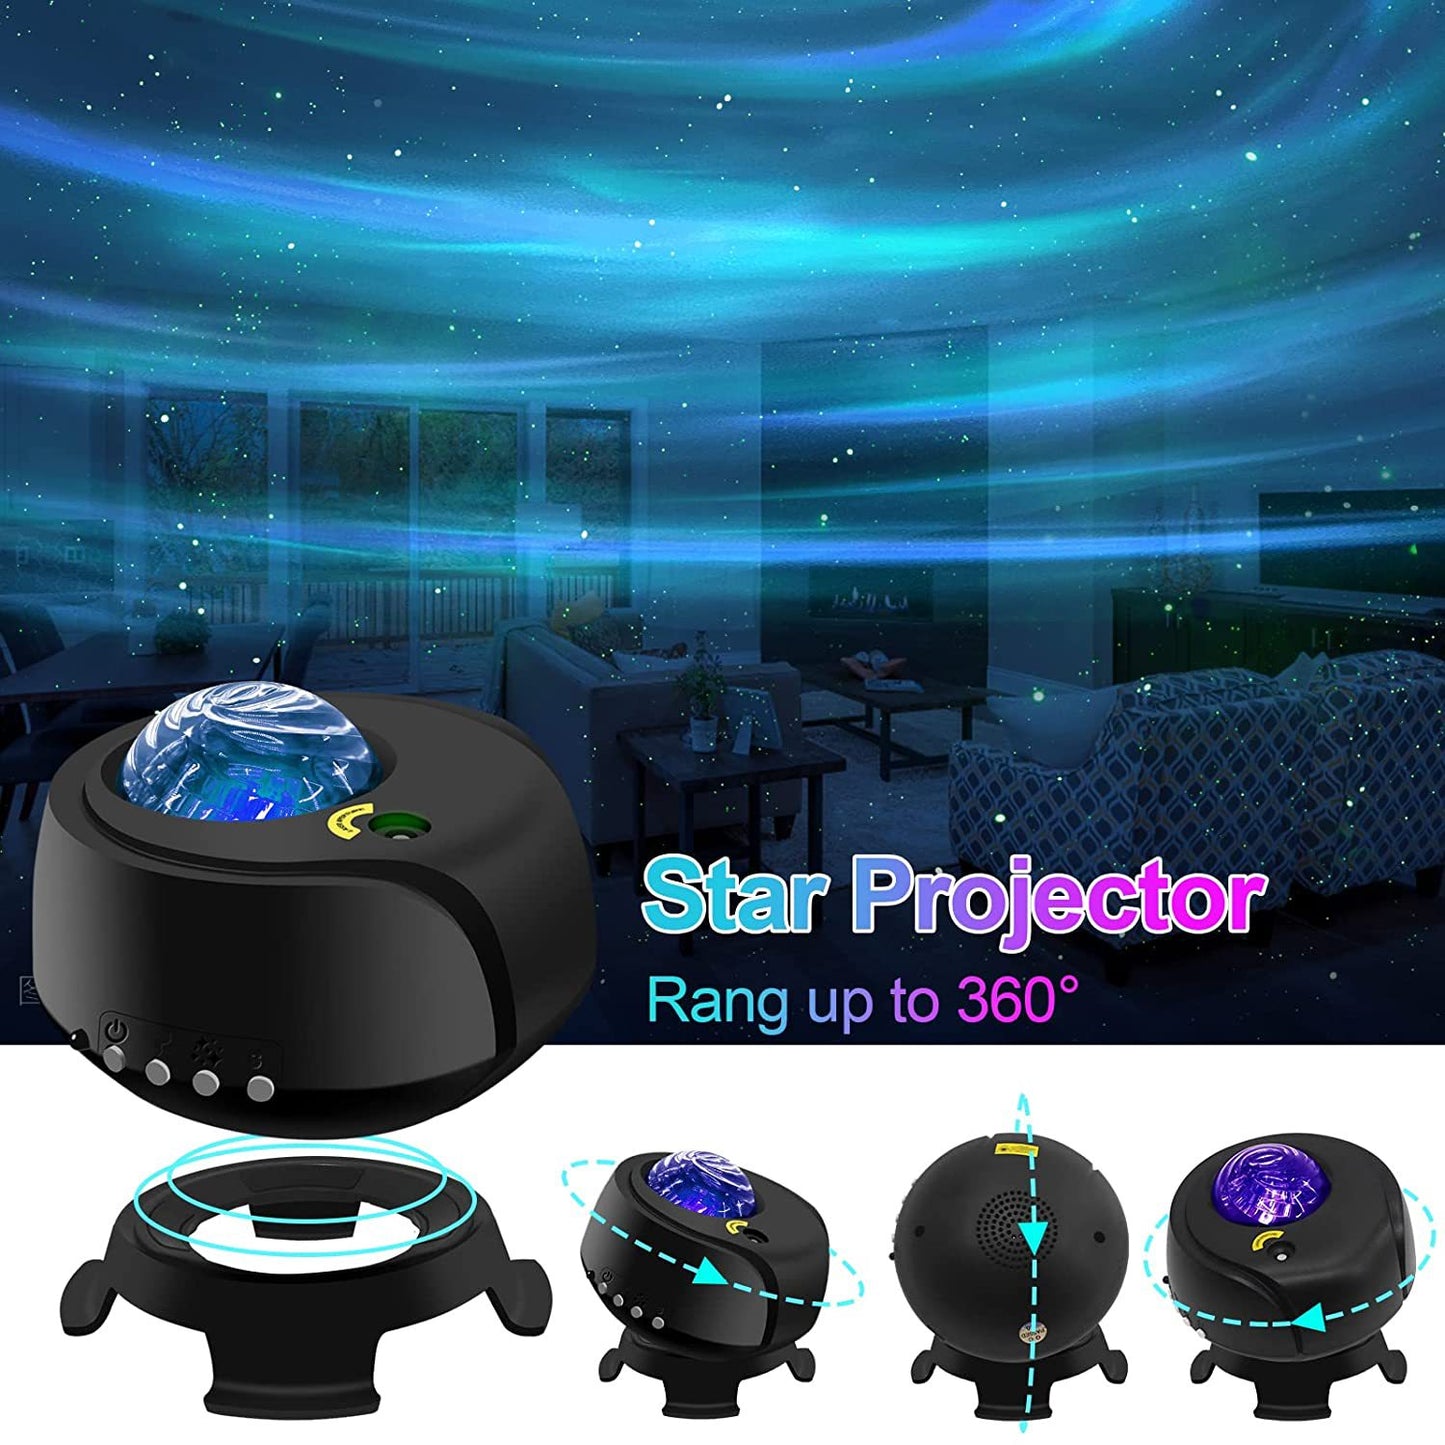 The Largest Coverage Area Galaxy Lights Projector, FLITI Star Projector, with Changing Nebula and Galaxy Shapes Galaxy Night Light